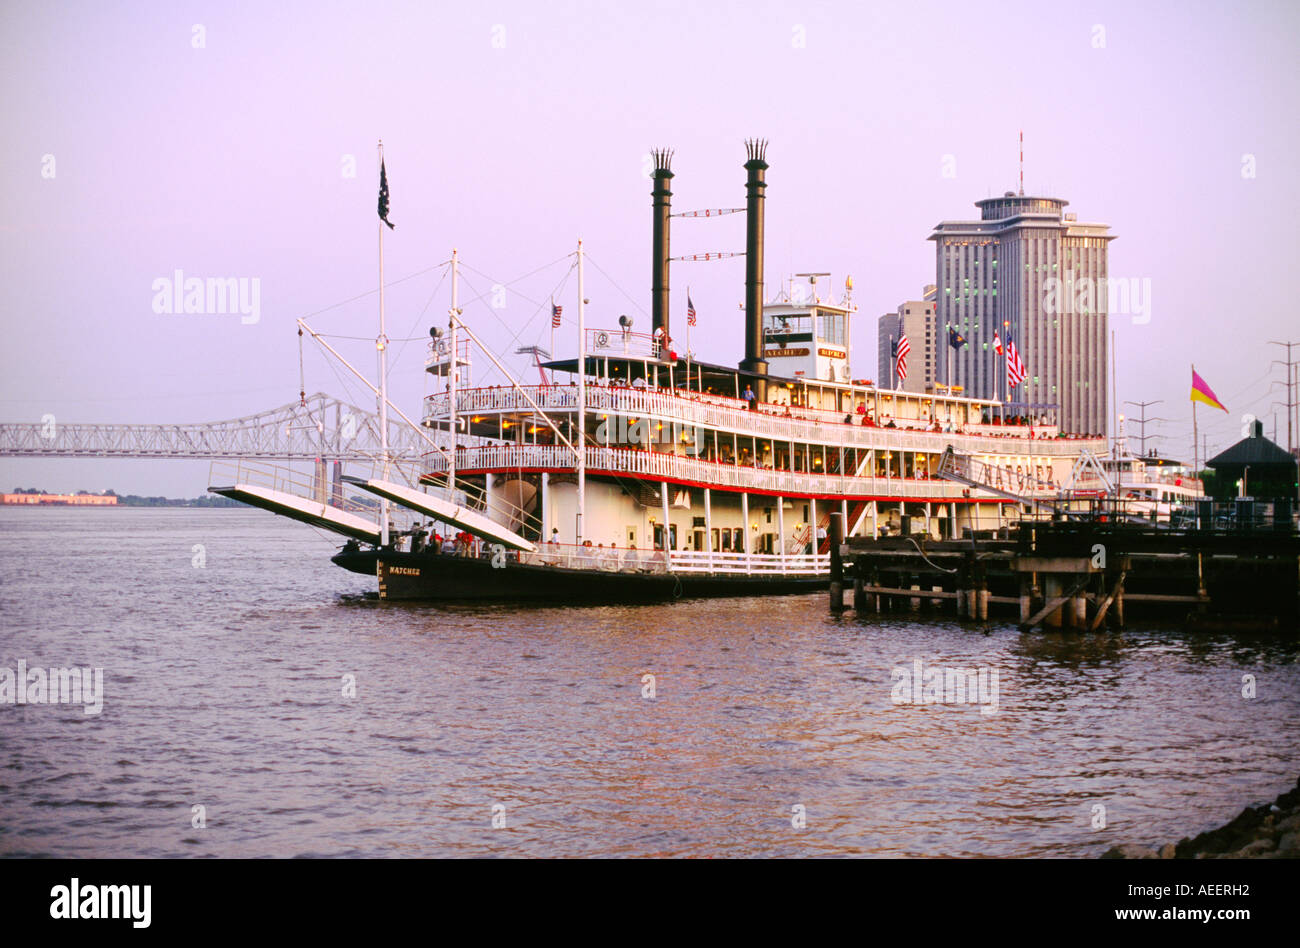 Evening cruise on the River Mississippi, New Orleans, Louisiana, USA. The stern wheeler paddle steamer riverboat Natchez Stock Photo